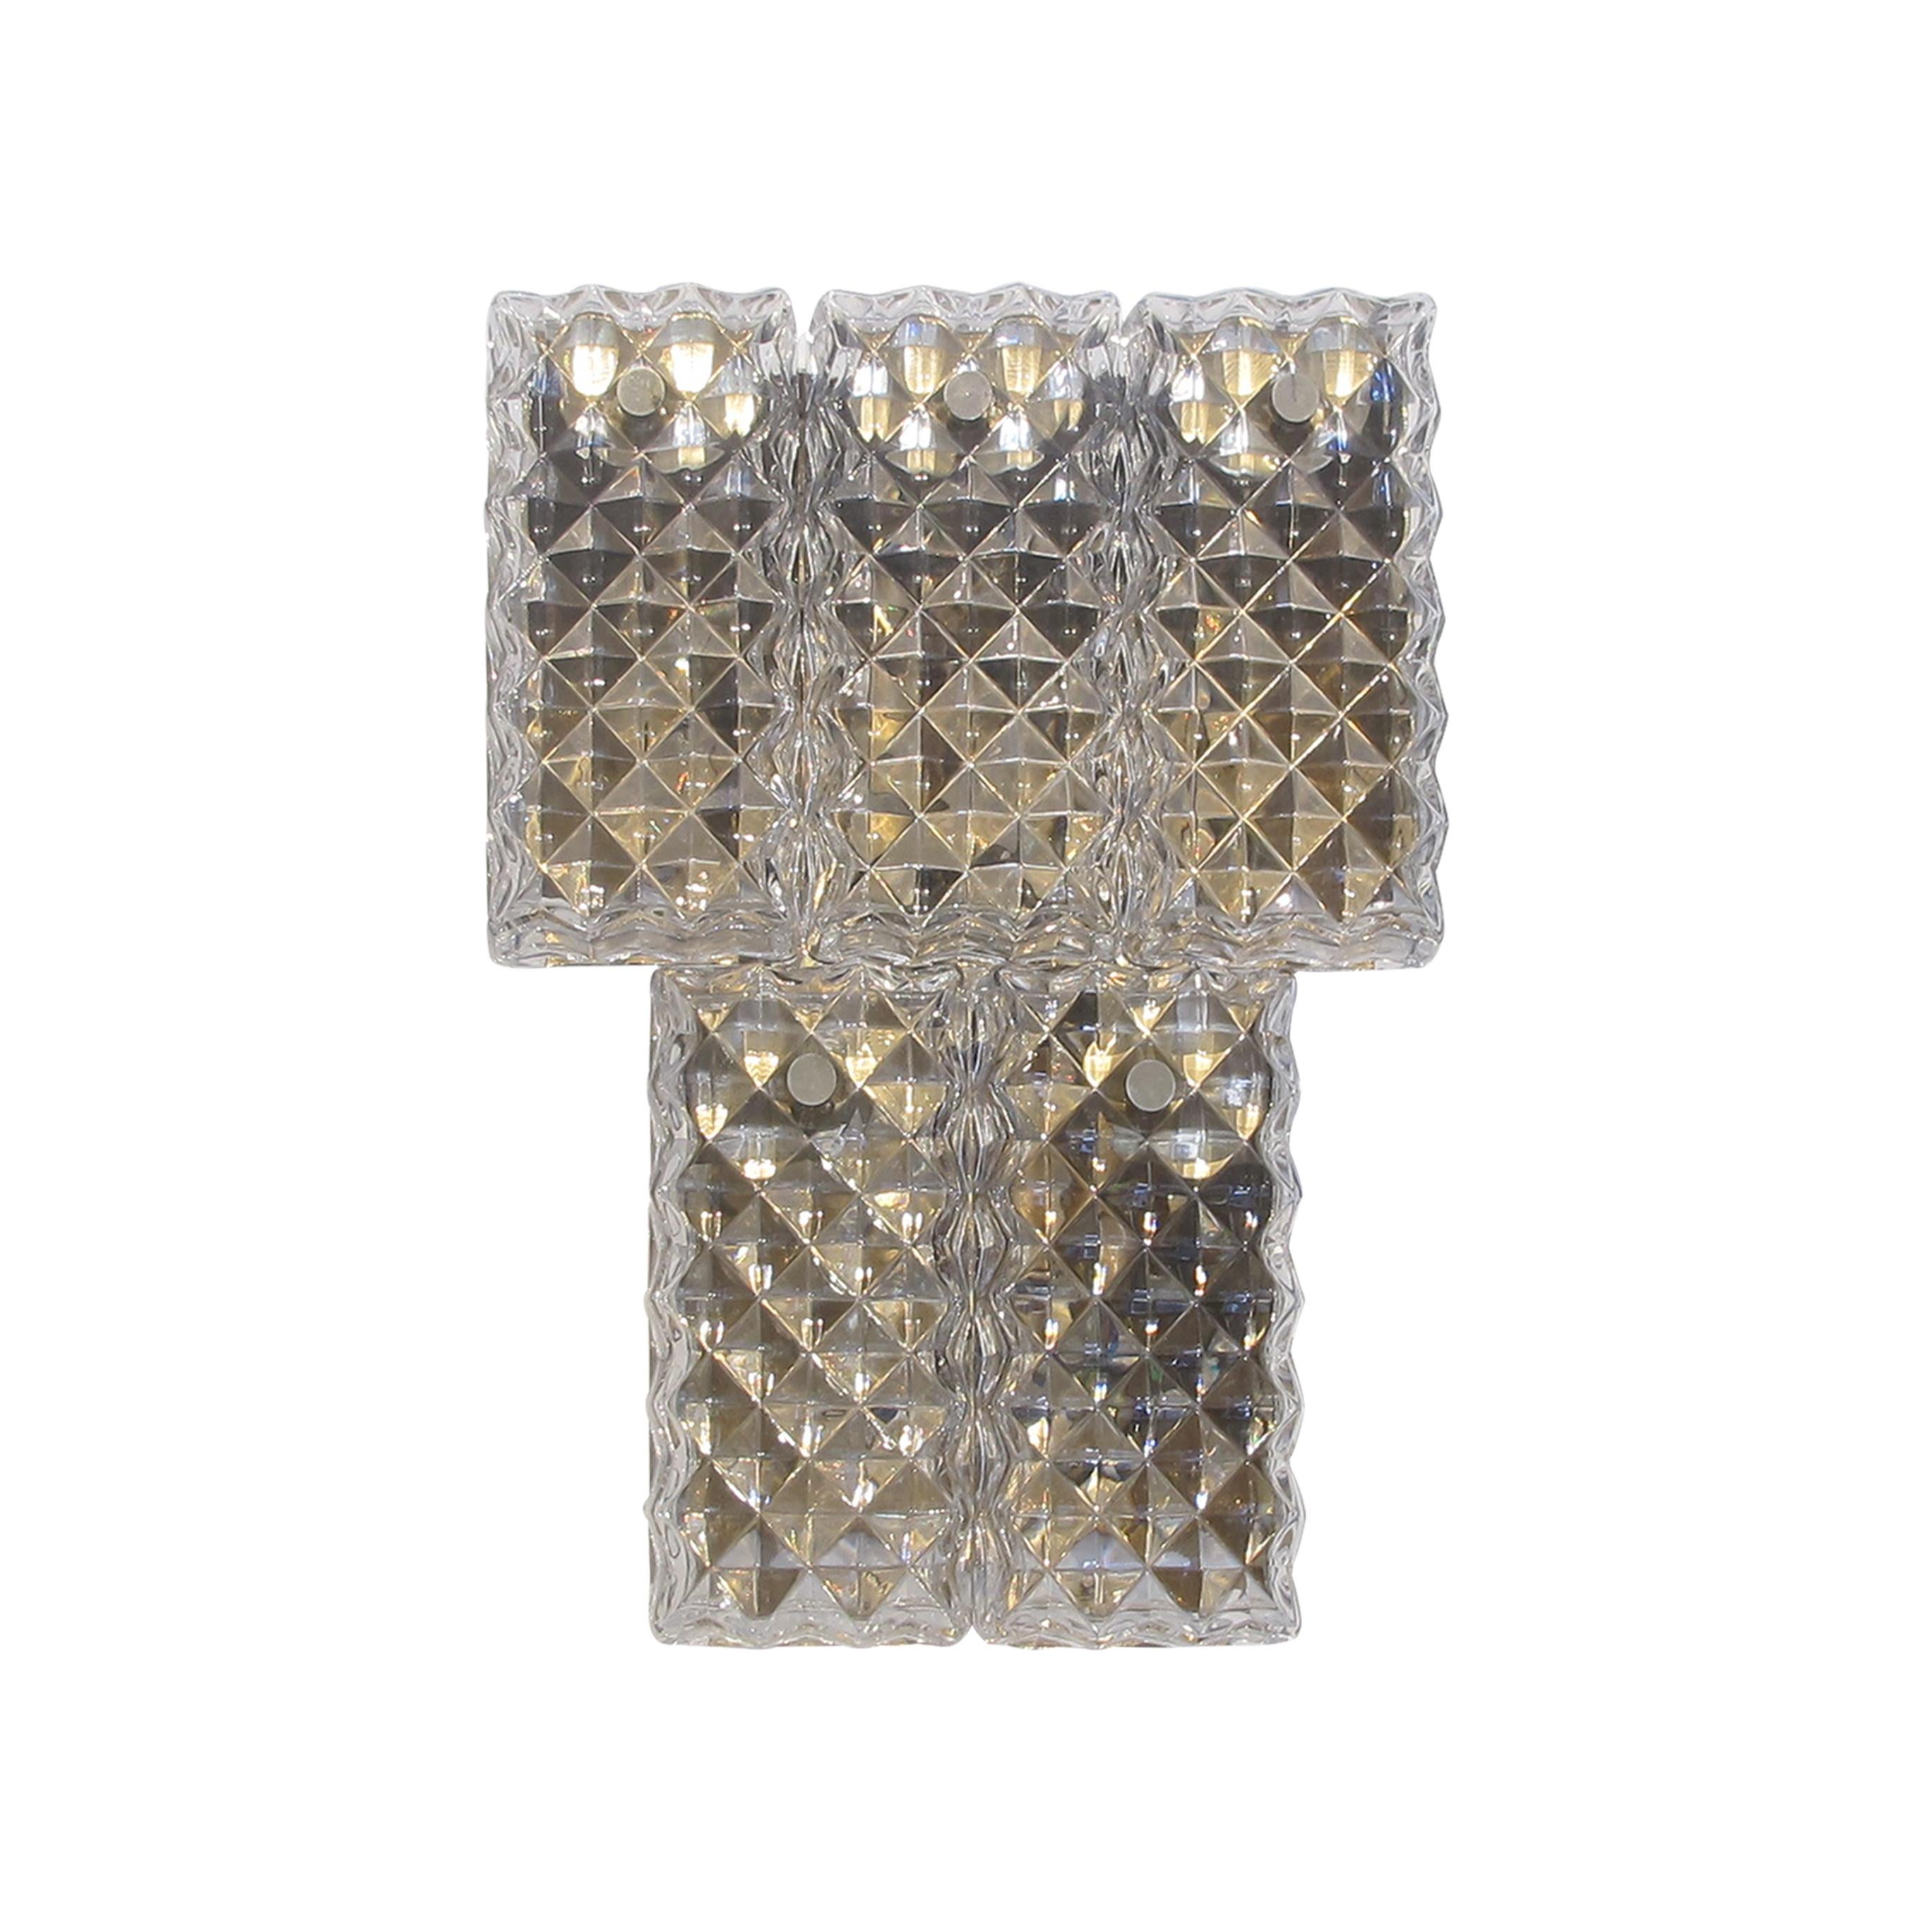 Single two-tier Kinkeldey wall light from the retro period, 1960s. Crafted with meticulous attention to detail, the light features textured glass plates with prism shapes to refract the light. The wall light holds four panes of glass held onto the